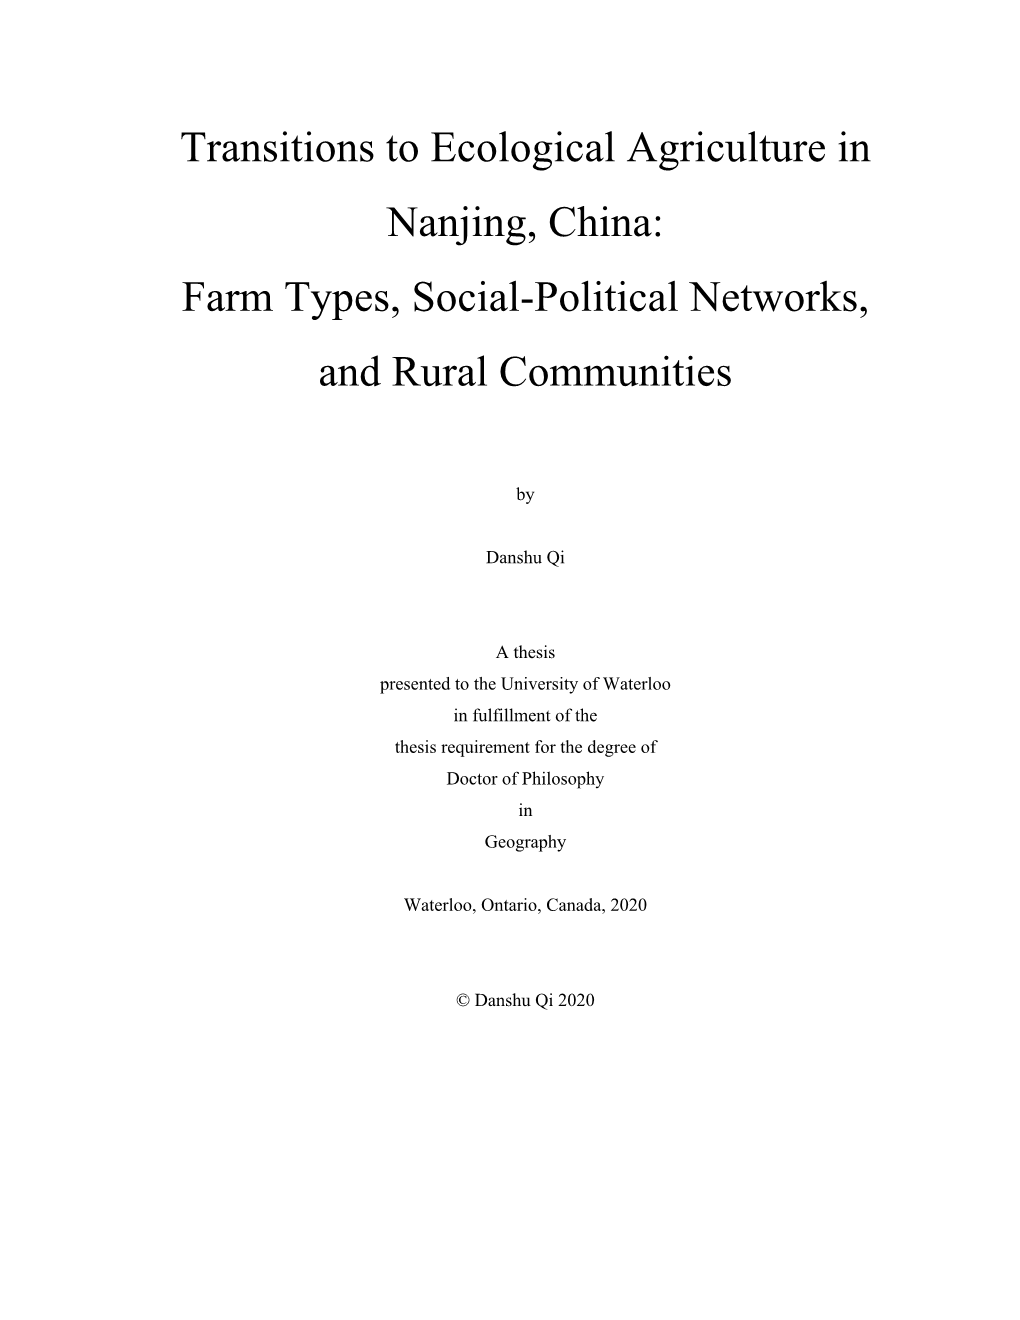 Transitions to Ecological Agriculture in Nanjing, China: Farm Types, Social-Political Networks, and Rural Communities